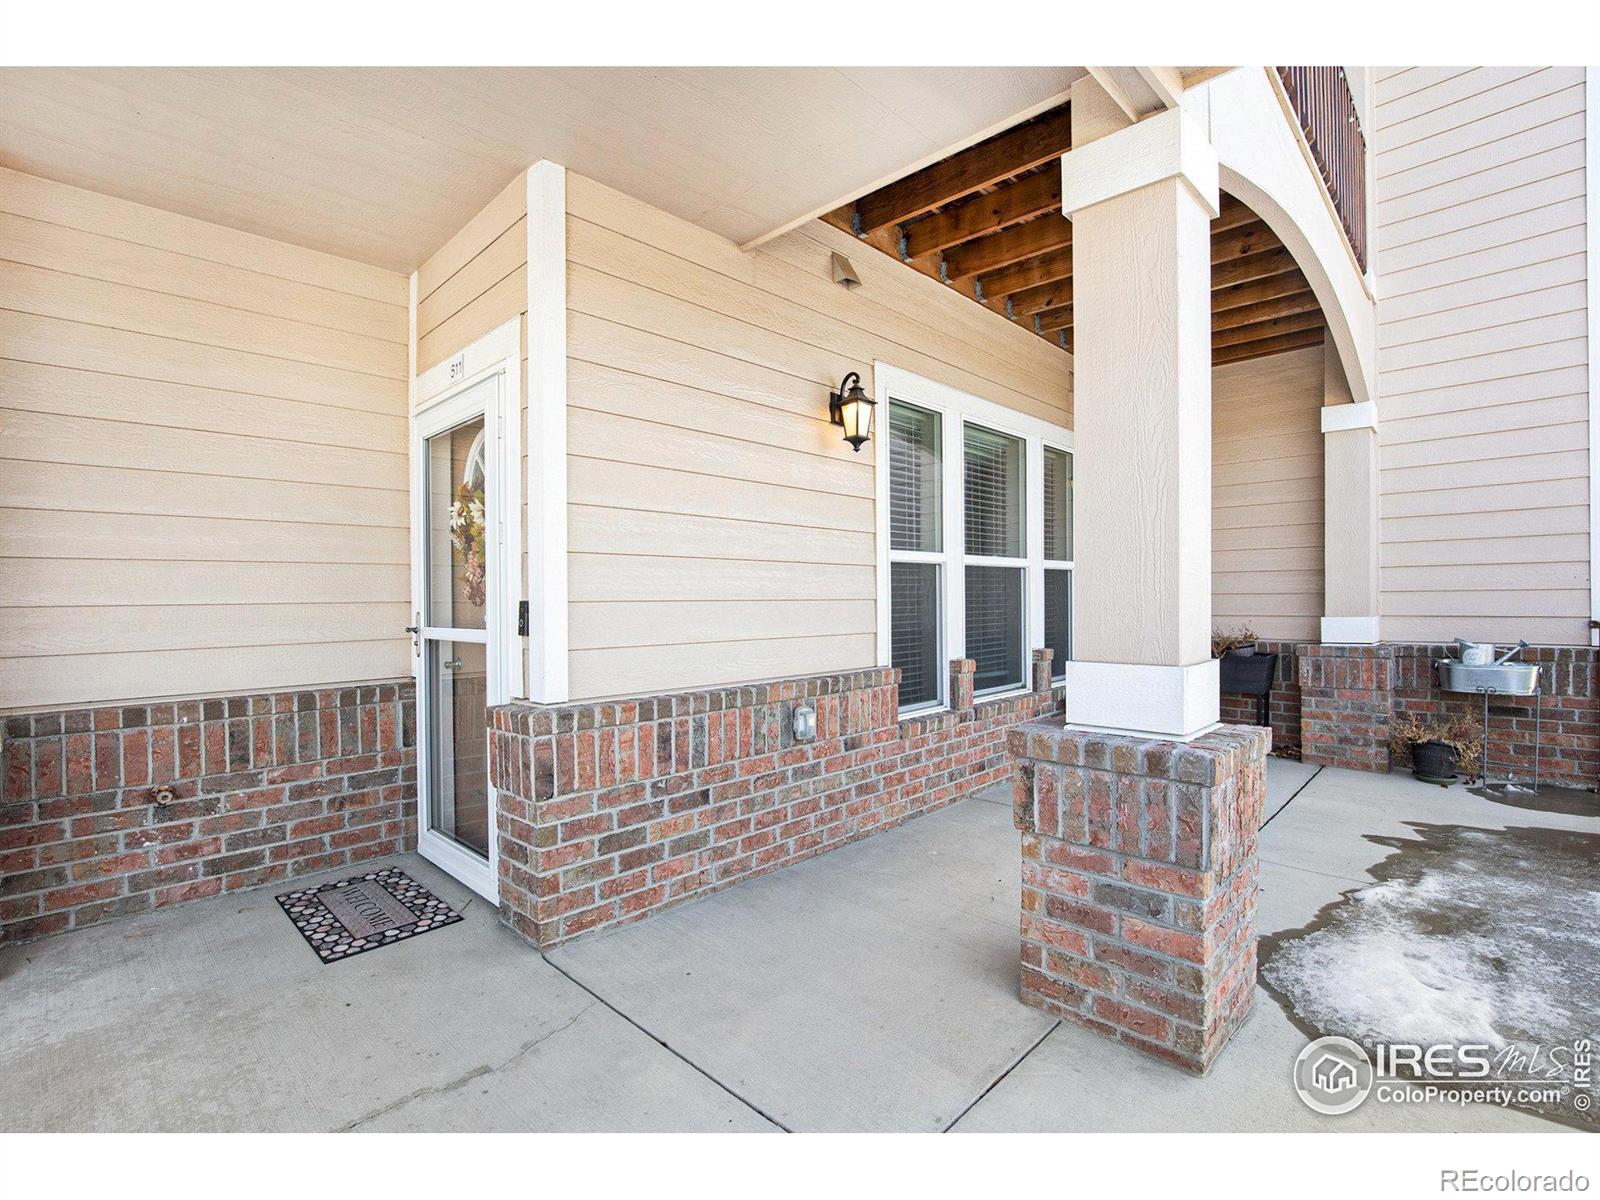 CMA Image for 4672 w 20th st rd,Greeley, Colorado